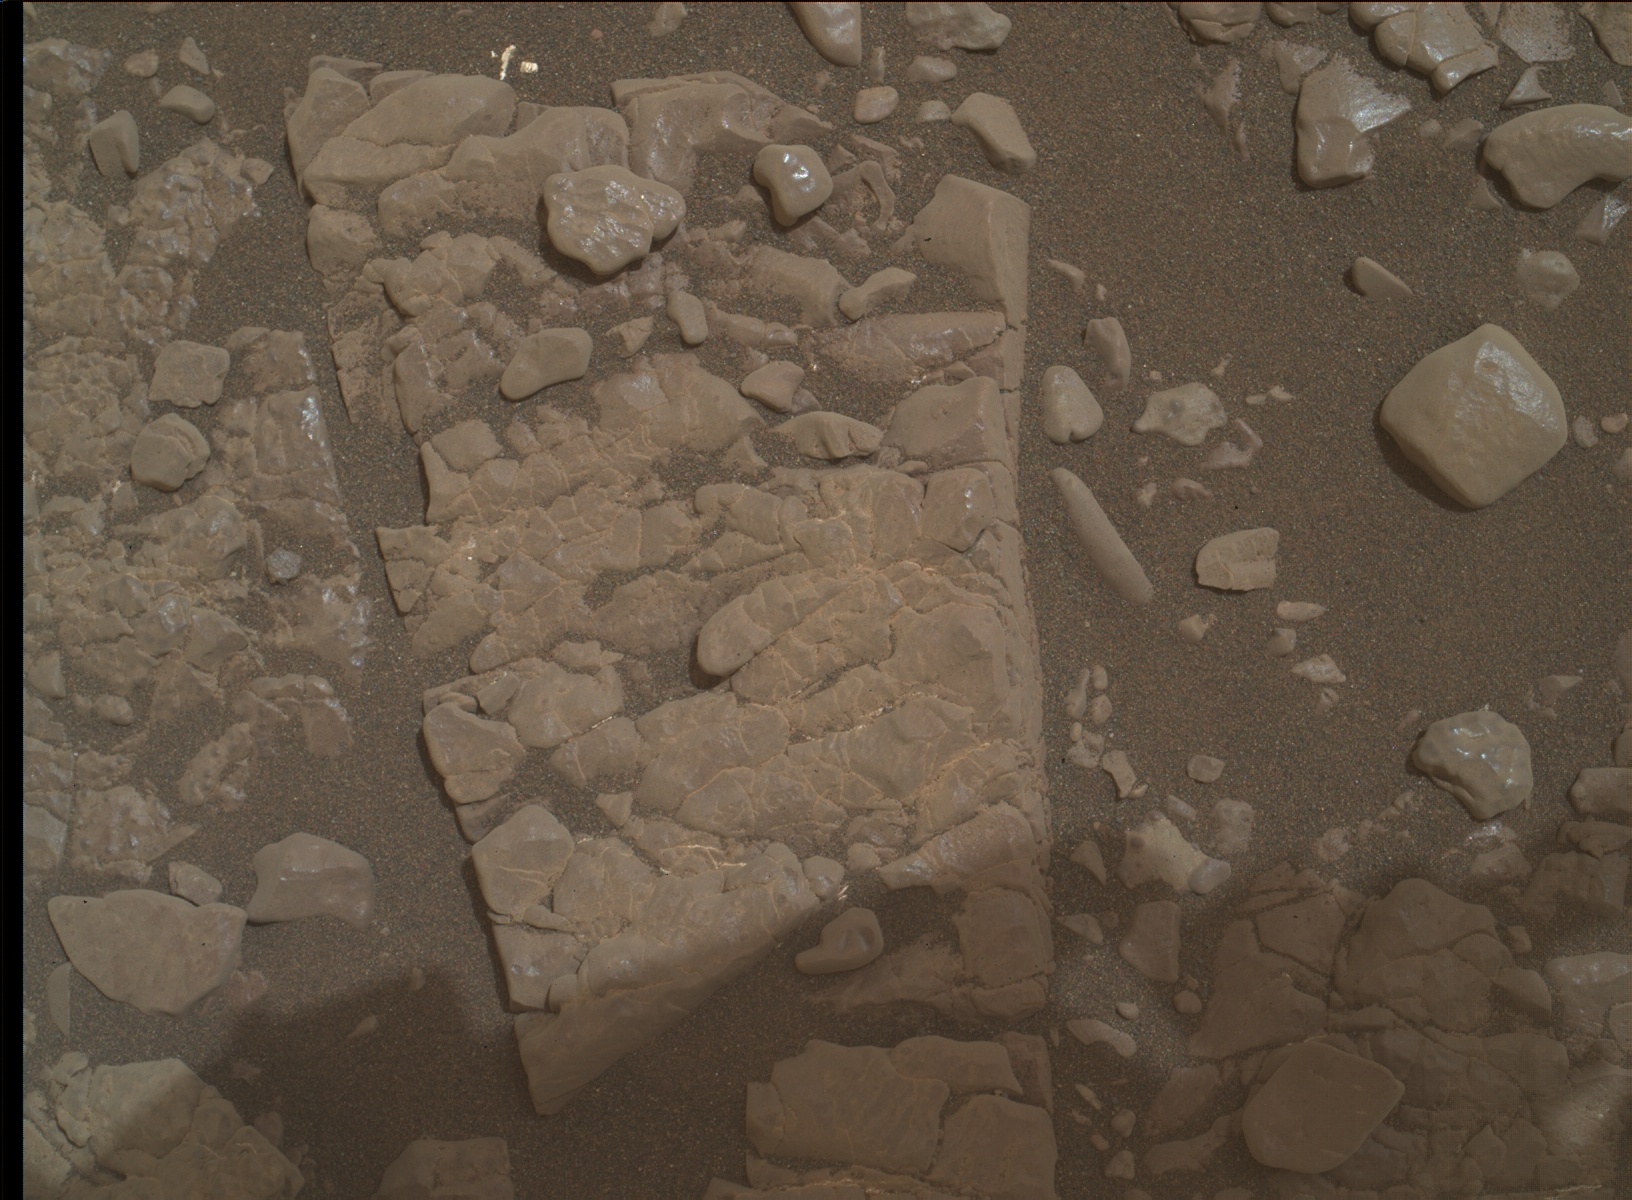 Nasa's Mars rover Curiosity acquired this image using its Mars Hand Lens Imager (MAHLI) on Sol 2967